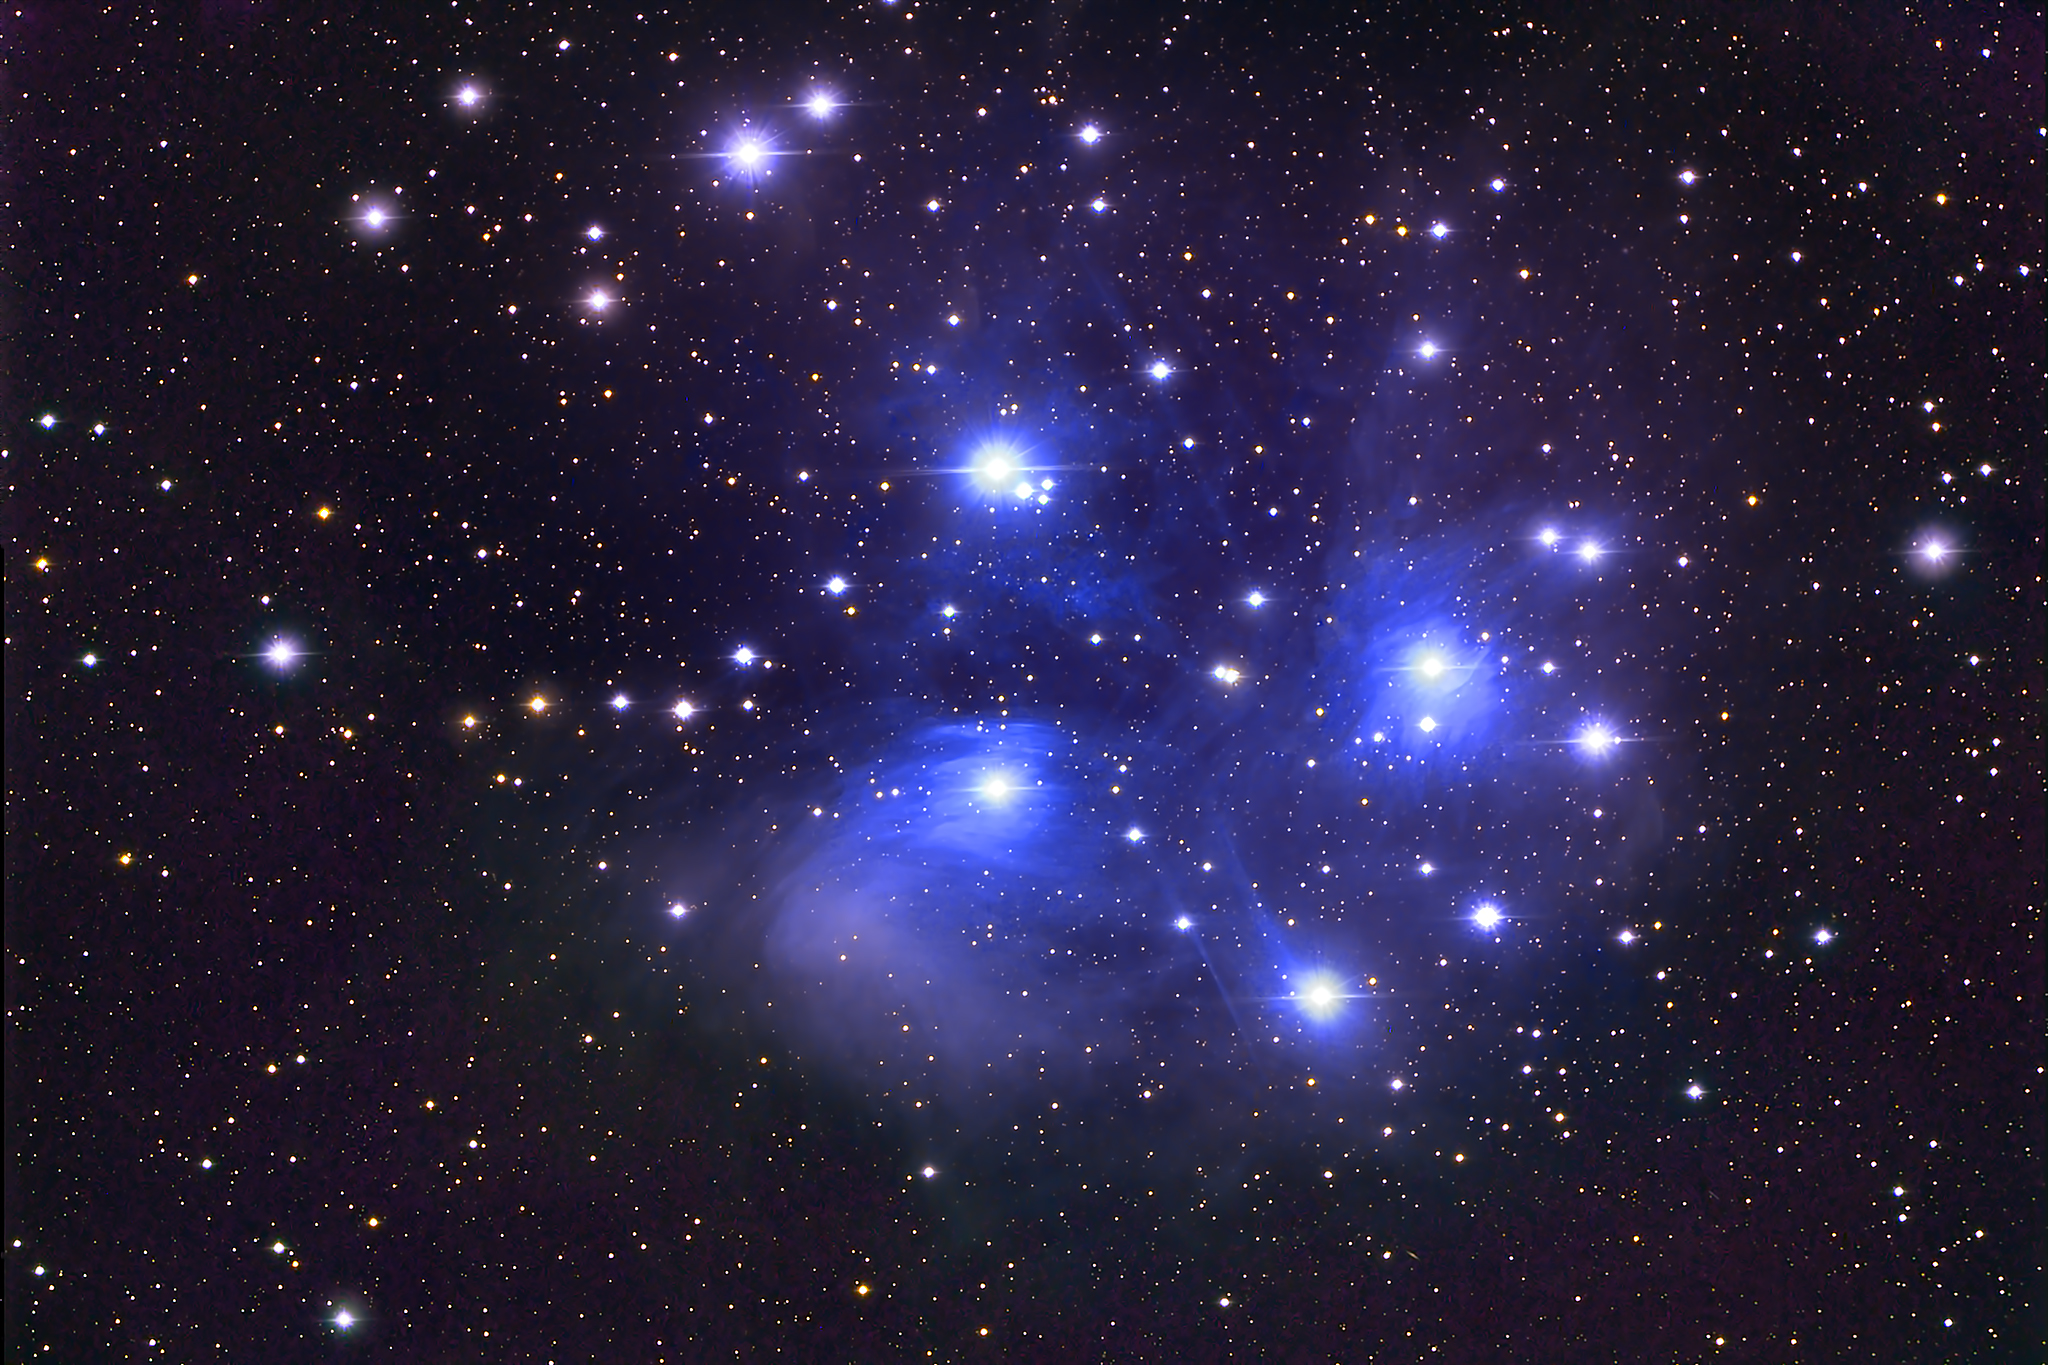 M45, The Pleiades (Seven Sisters) by Dylan O’Donnell